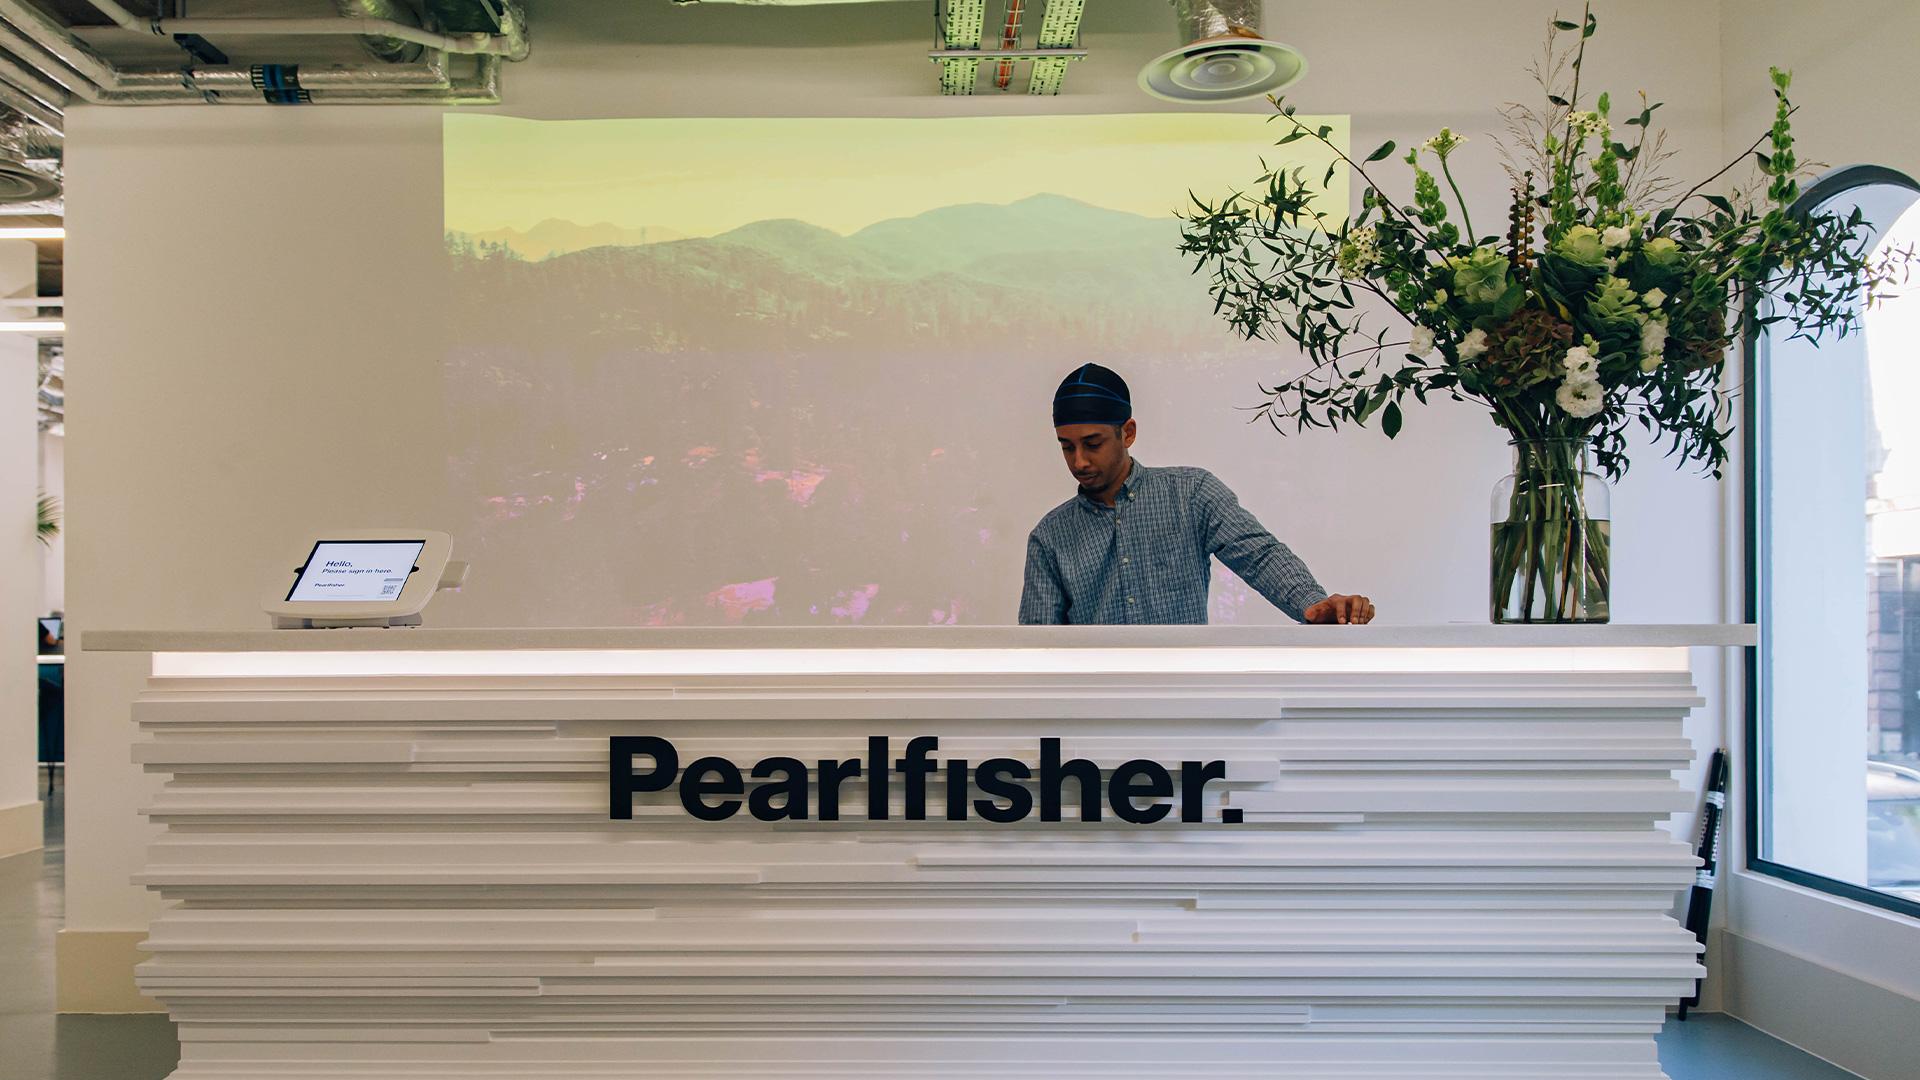 Pearlfisher: Our journey toward B Corp certification